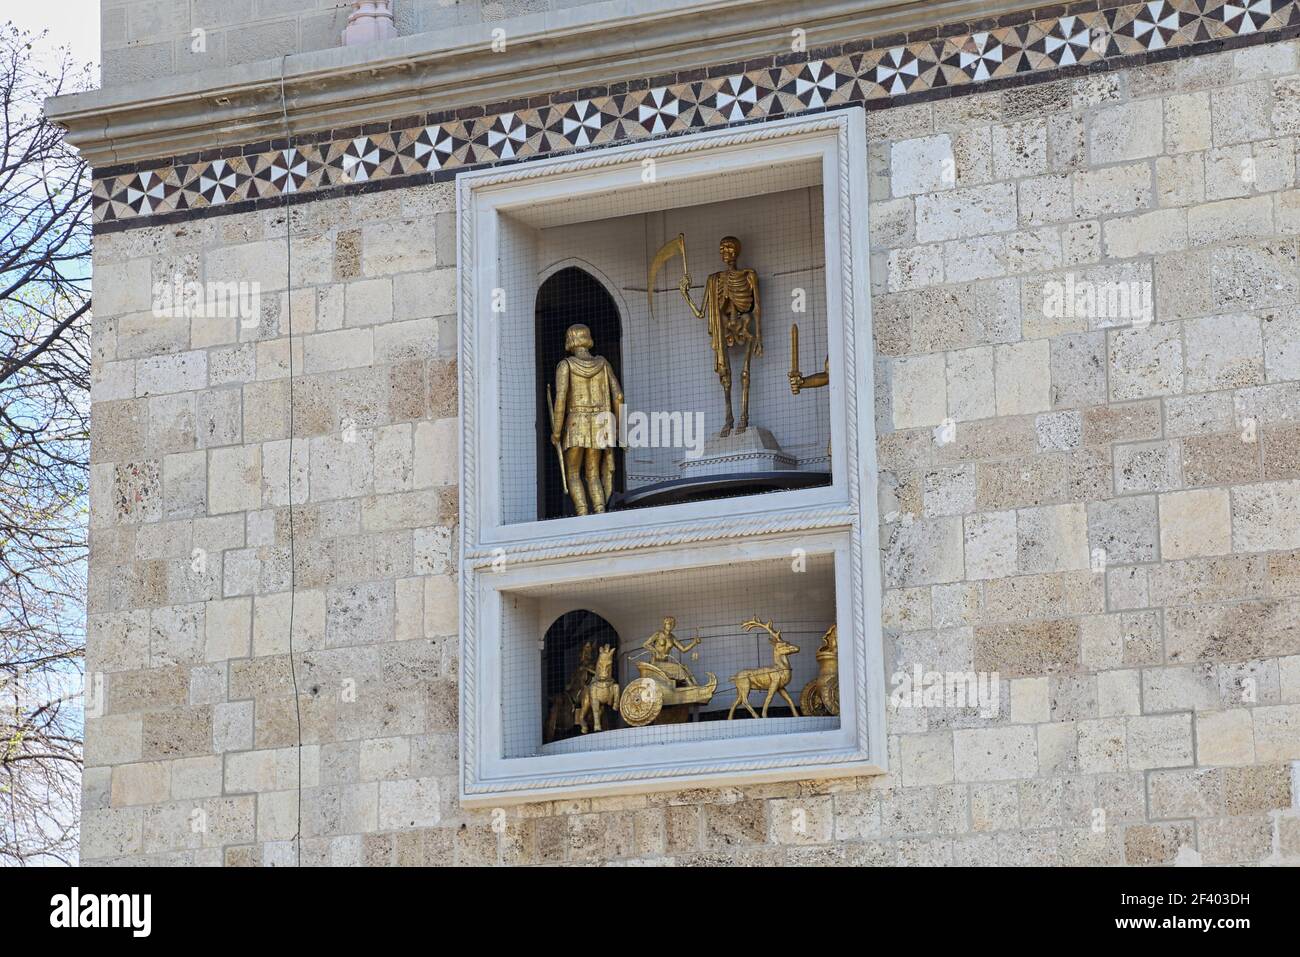 Moving figures on the bell tower of Duomo di Messina, Messina Cathedral, Sicily, Italy Stock Photo